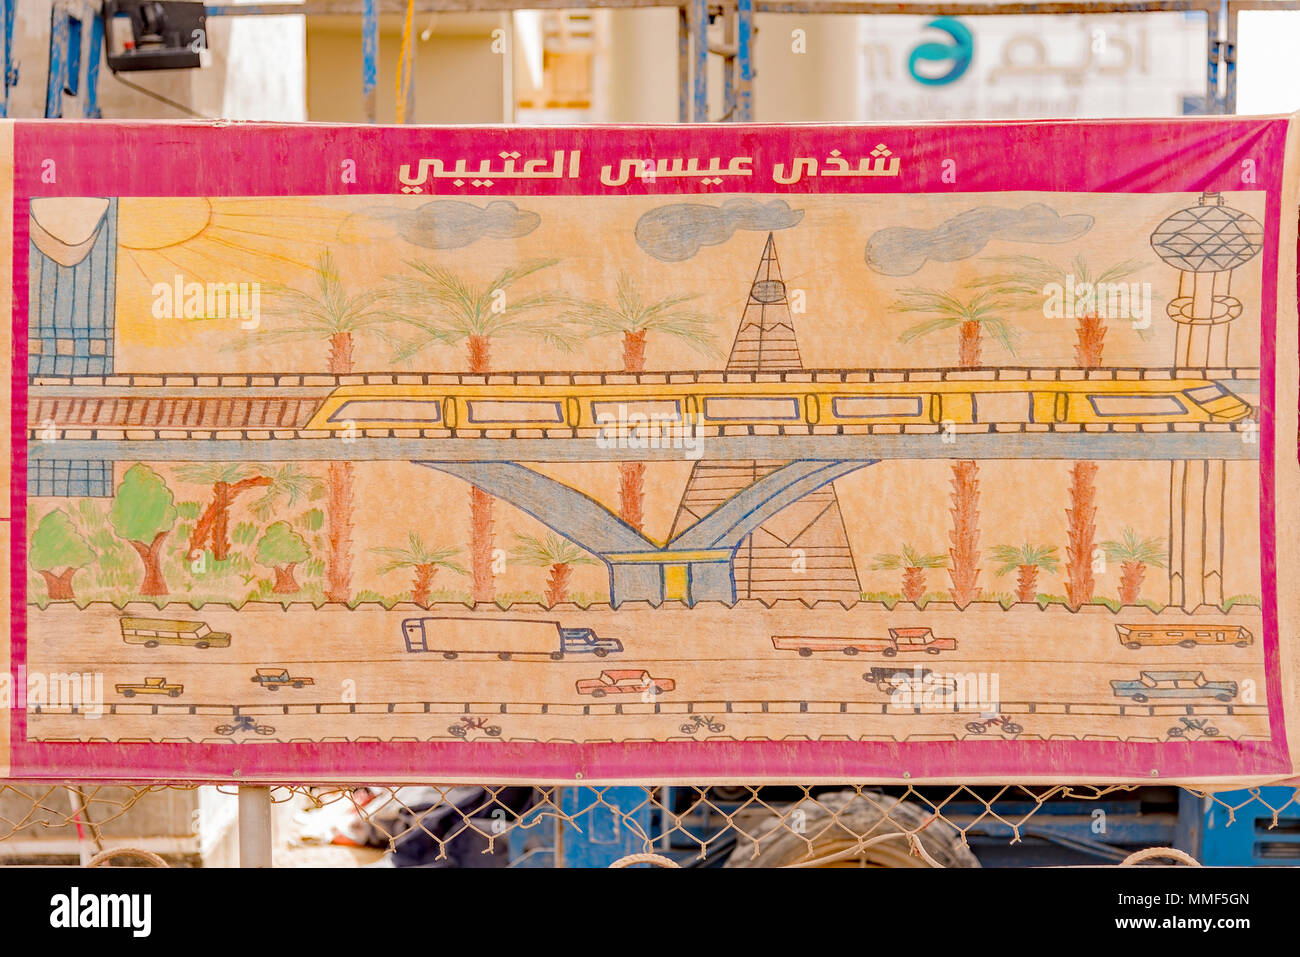 Posters of children's artwork of the new Riyadh public rapid transit system. Posters can be seen at the constructions sites around Riyadh. Stock Photo